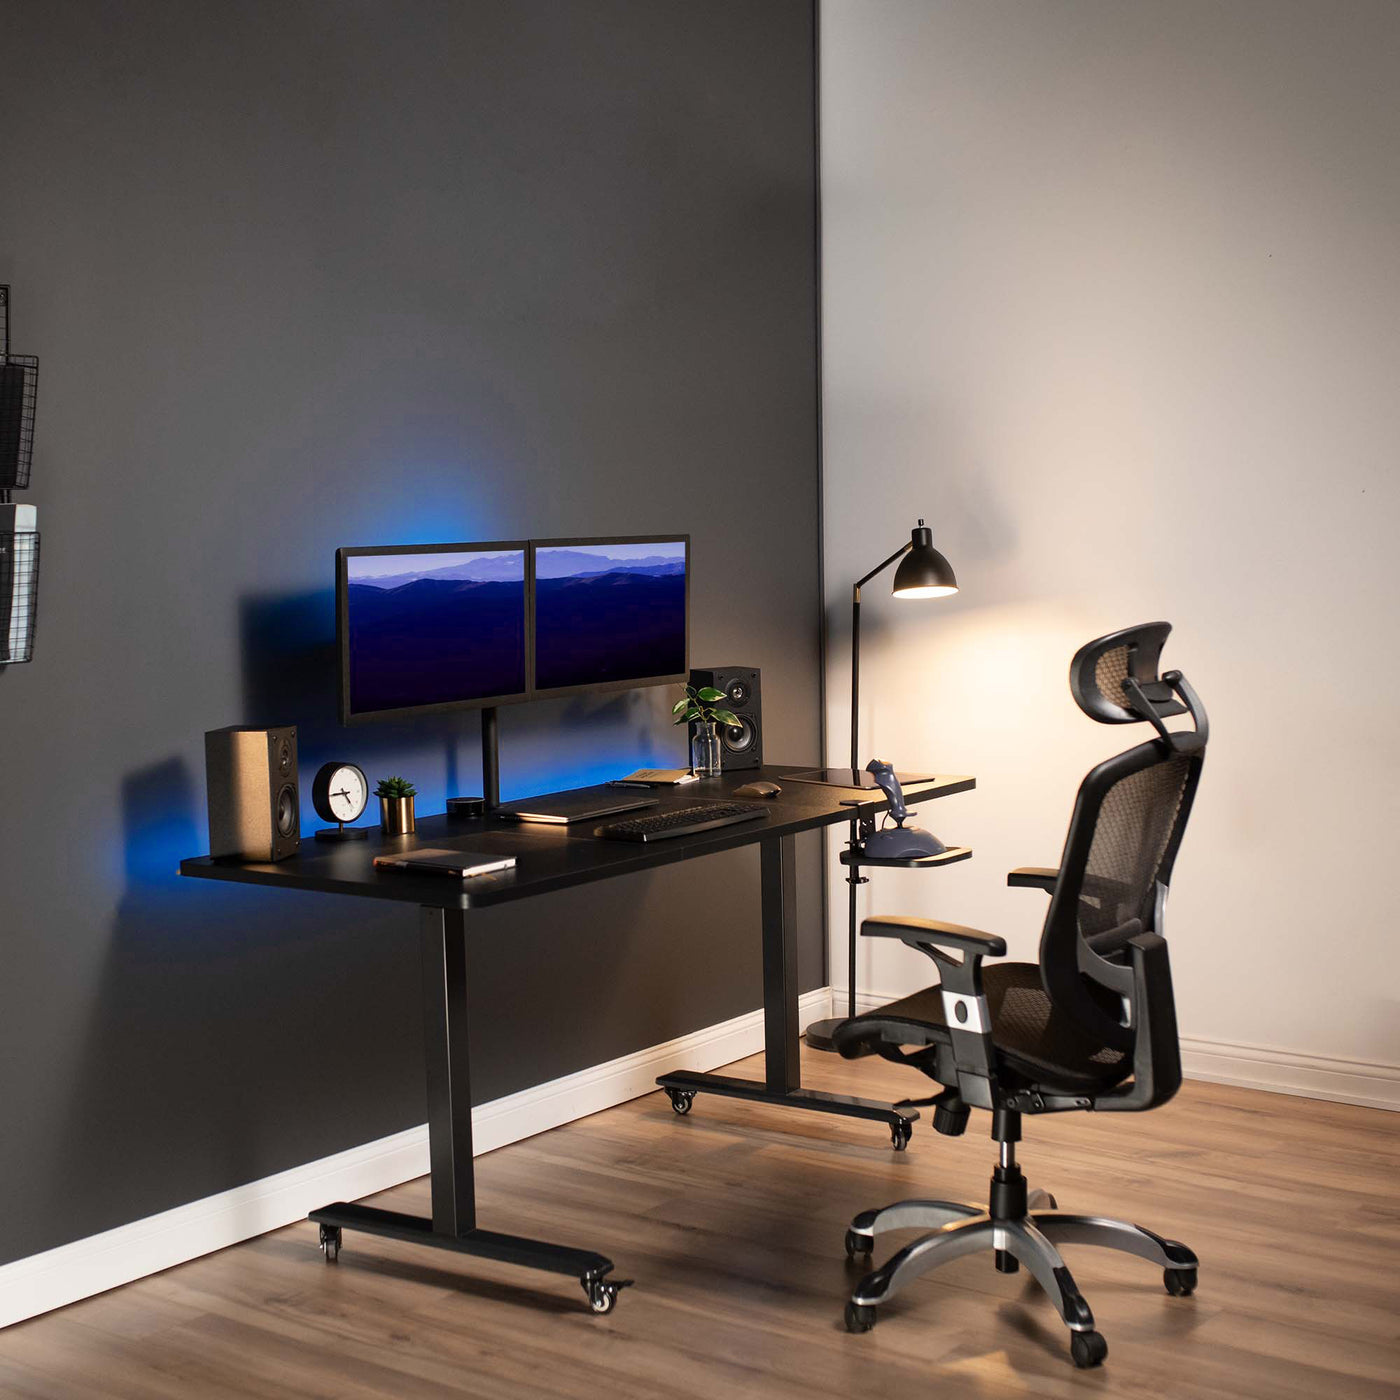 Modern office workspace with furnished sit-to-stand electric desk and under-desk mount keyboard and mouse tray.